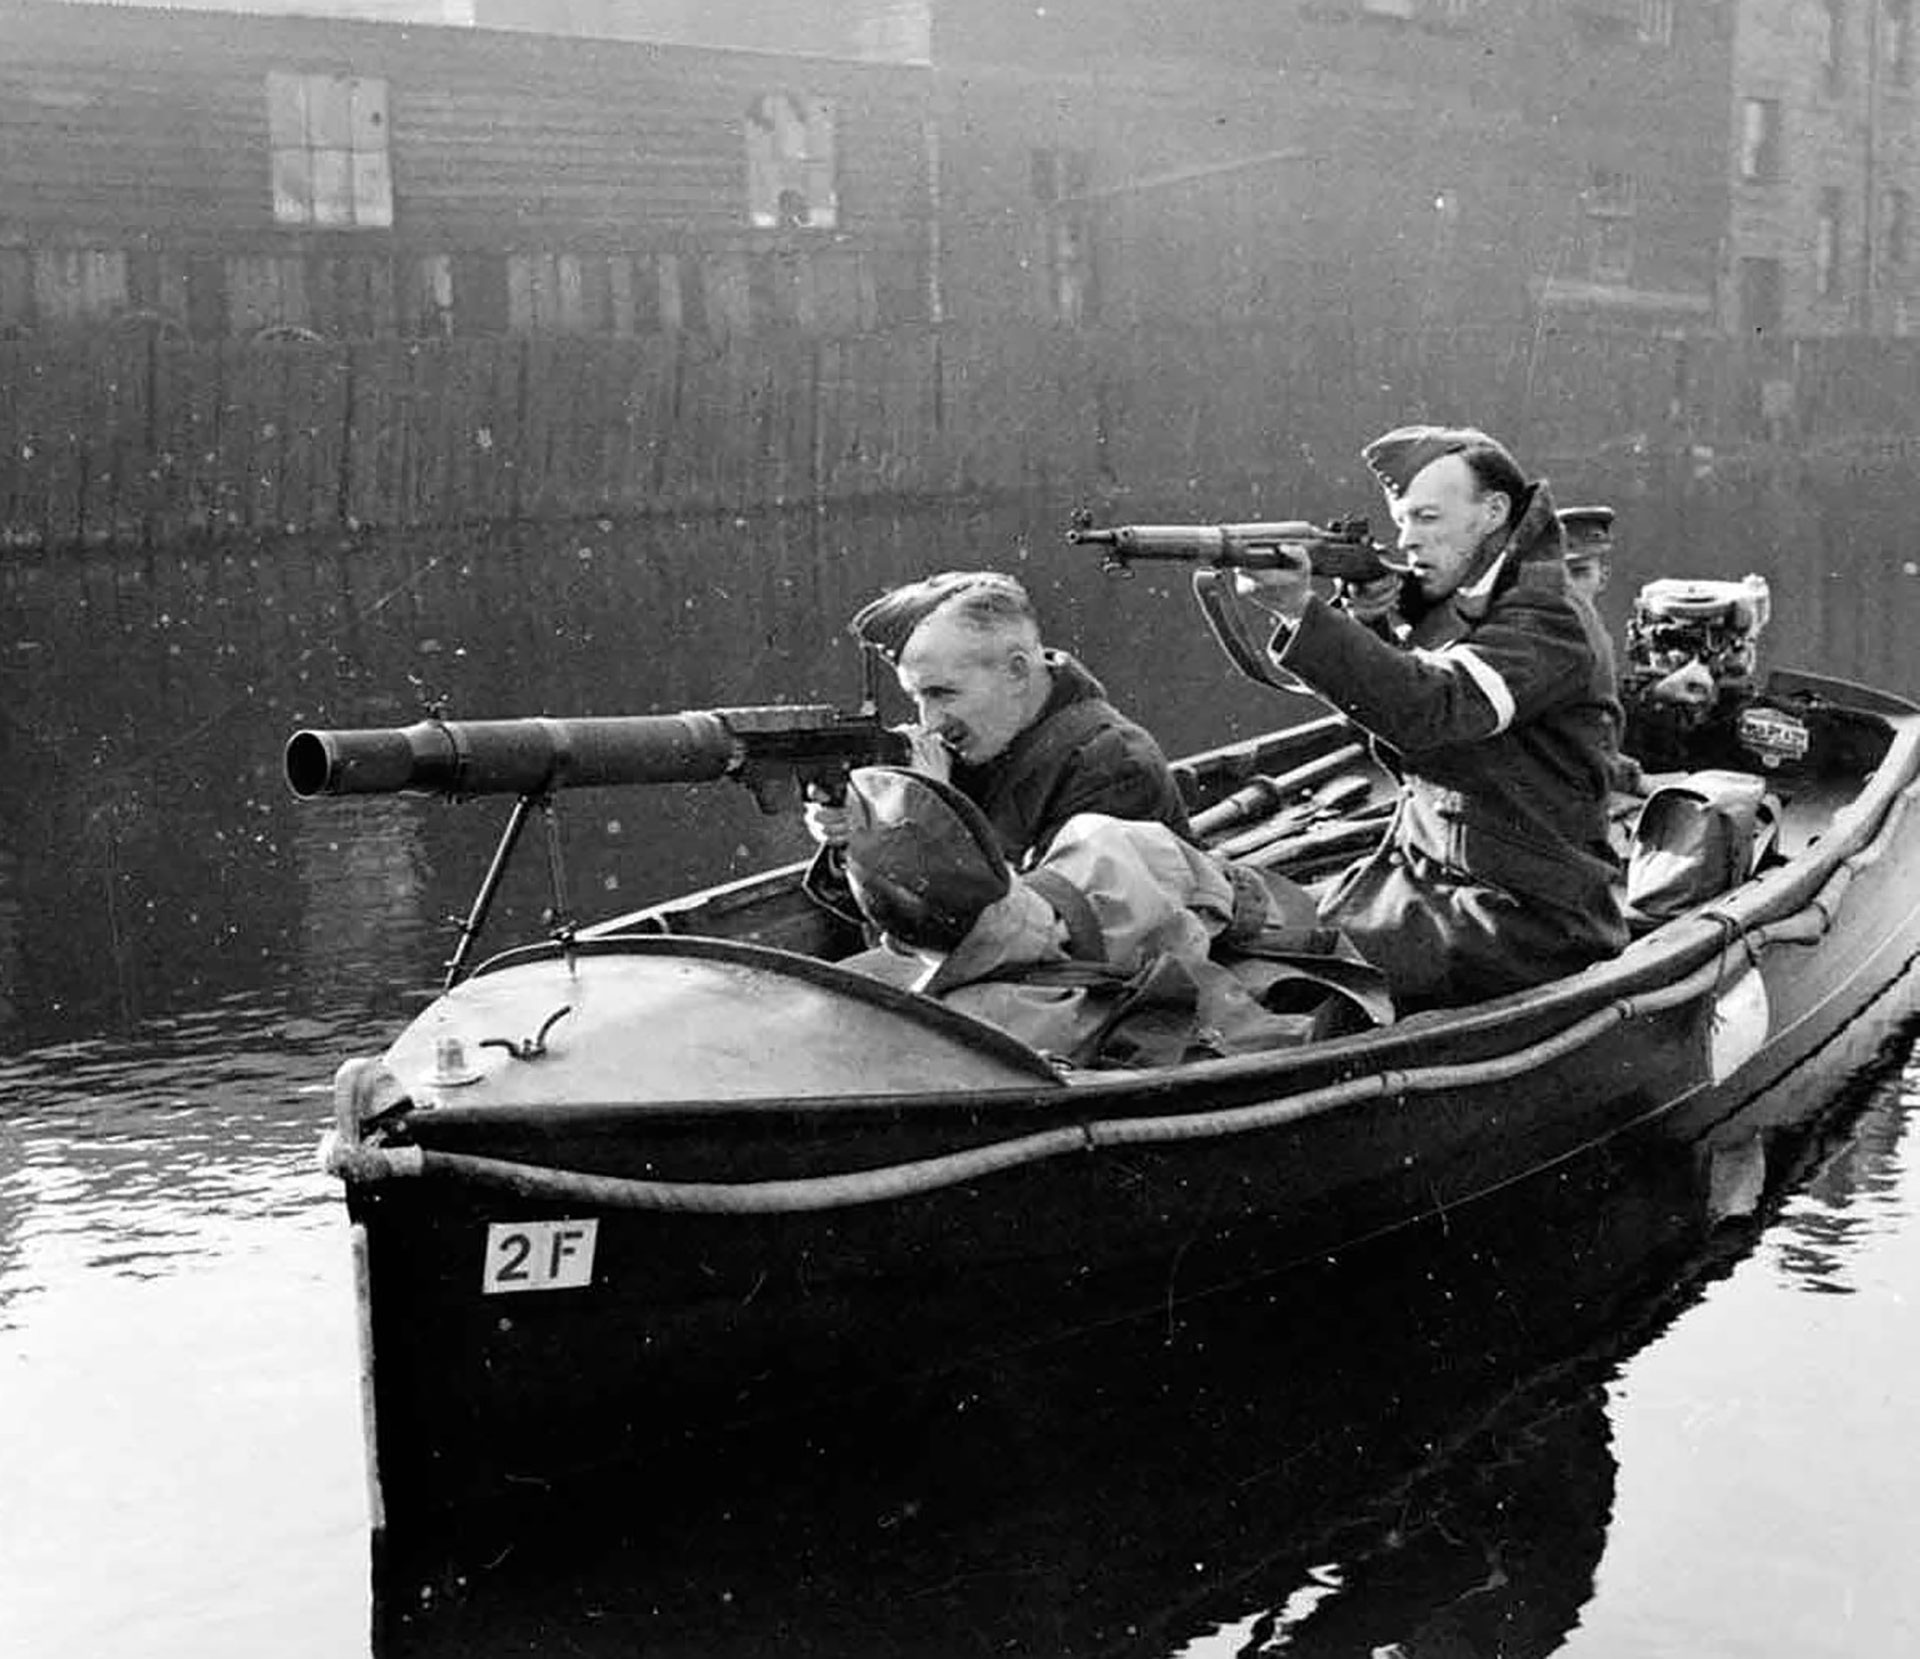 The Home Guard takes to Britain’s waterways with a Lewis machine gun and a P14 rifle.  The Lewis, a WWI holdover, proved to be an important weapon in England’s defense. NARA